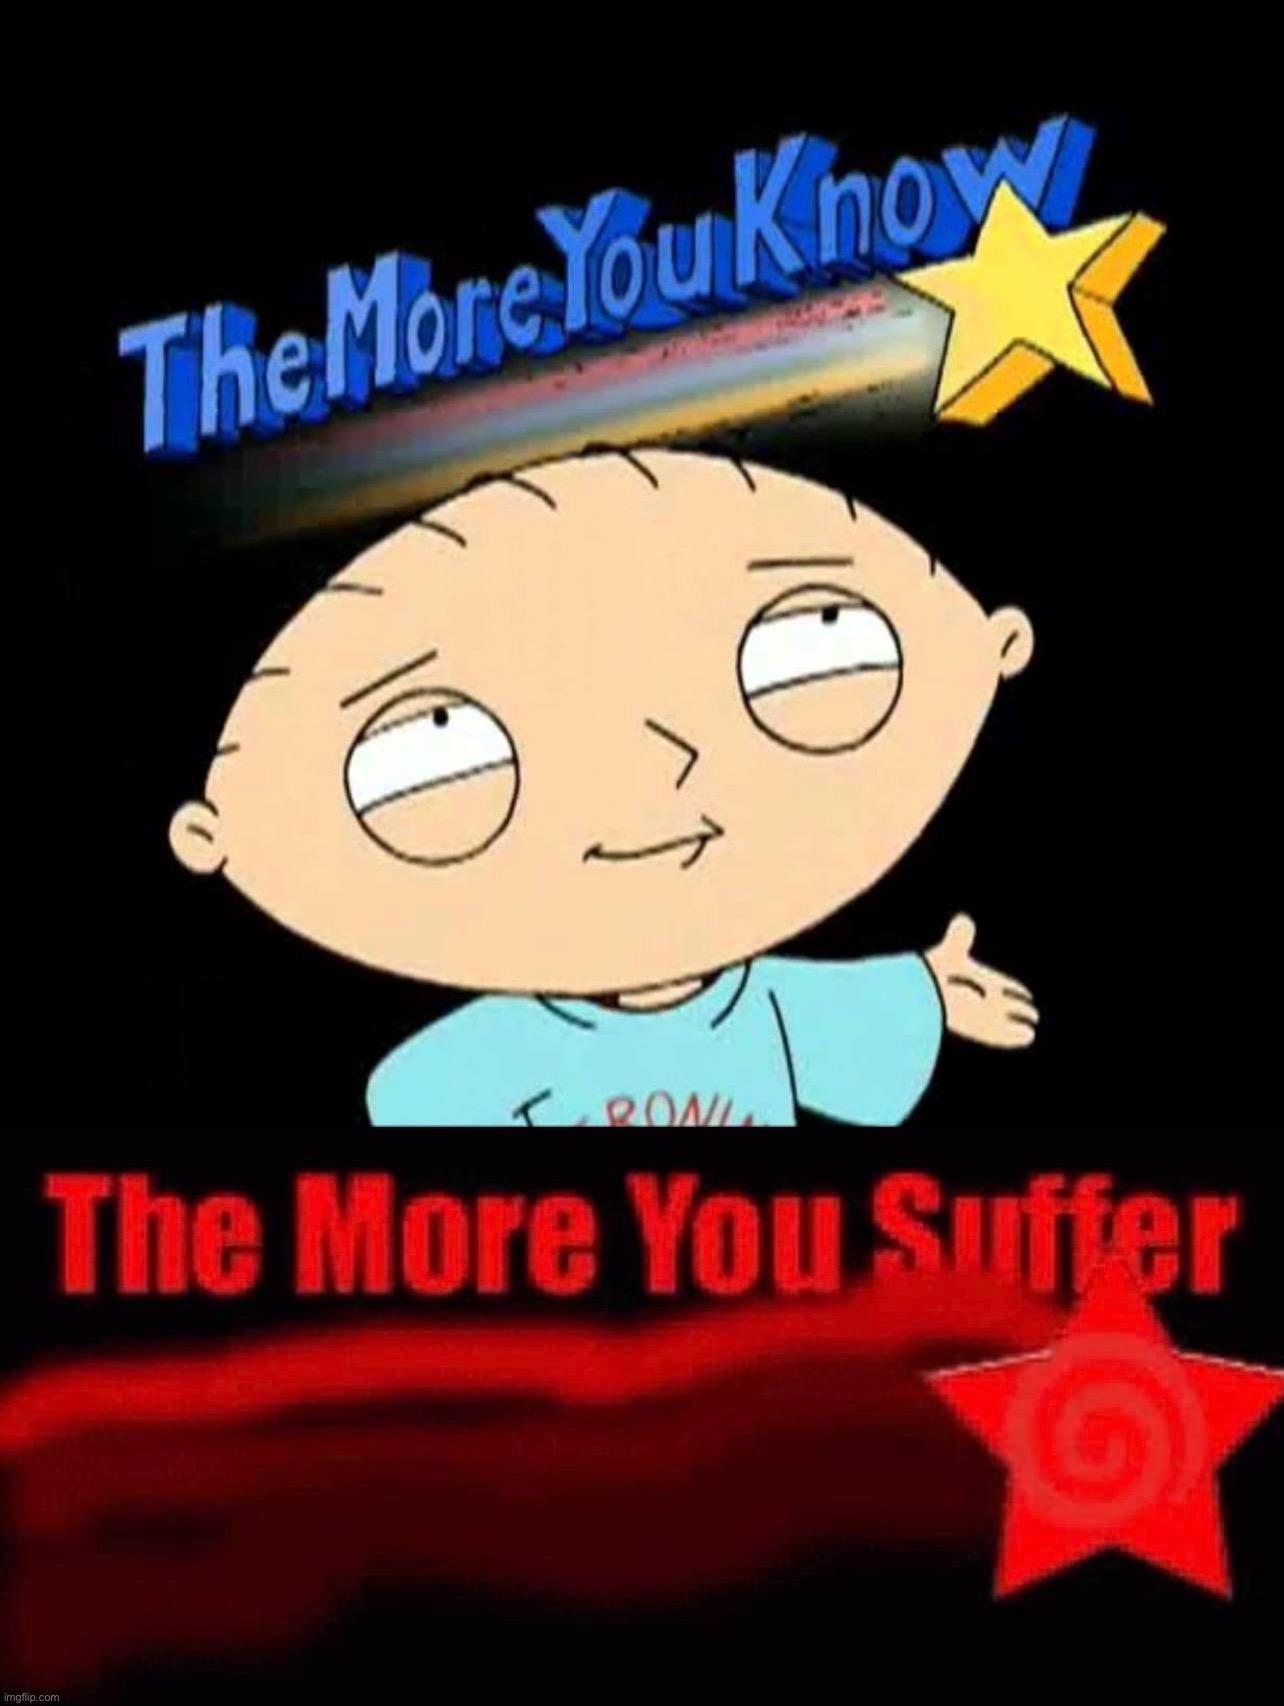 image-tagged-in-the-more-you-know-stewie-the-more-you-suffer-imgflip